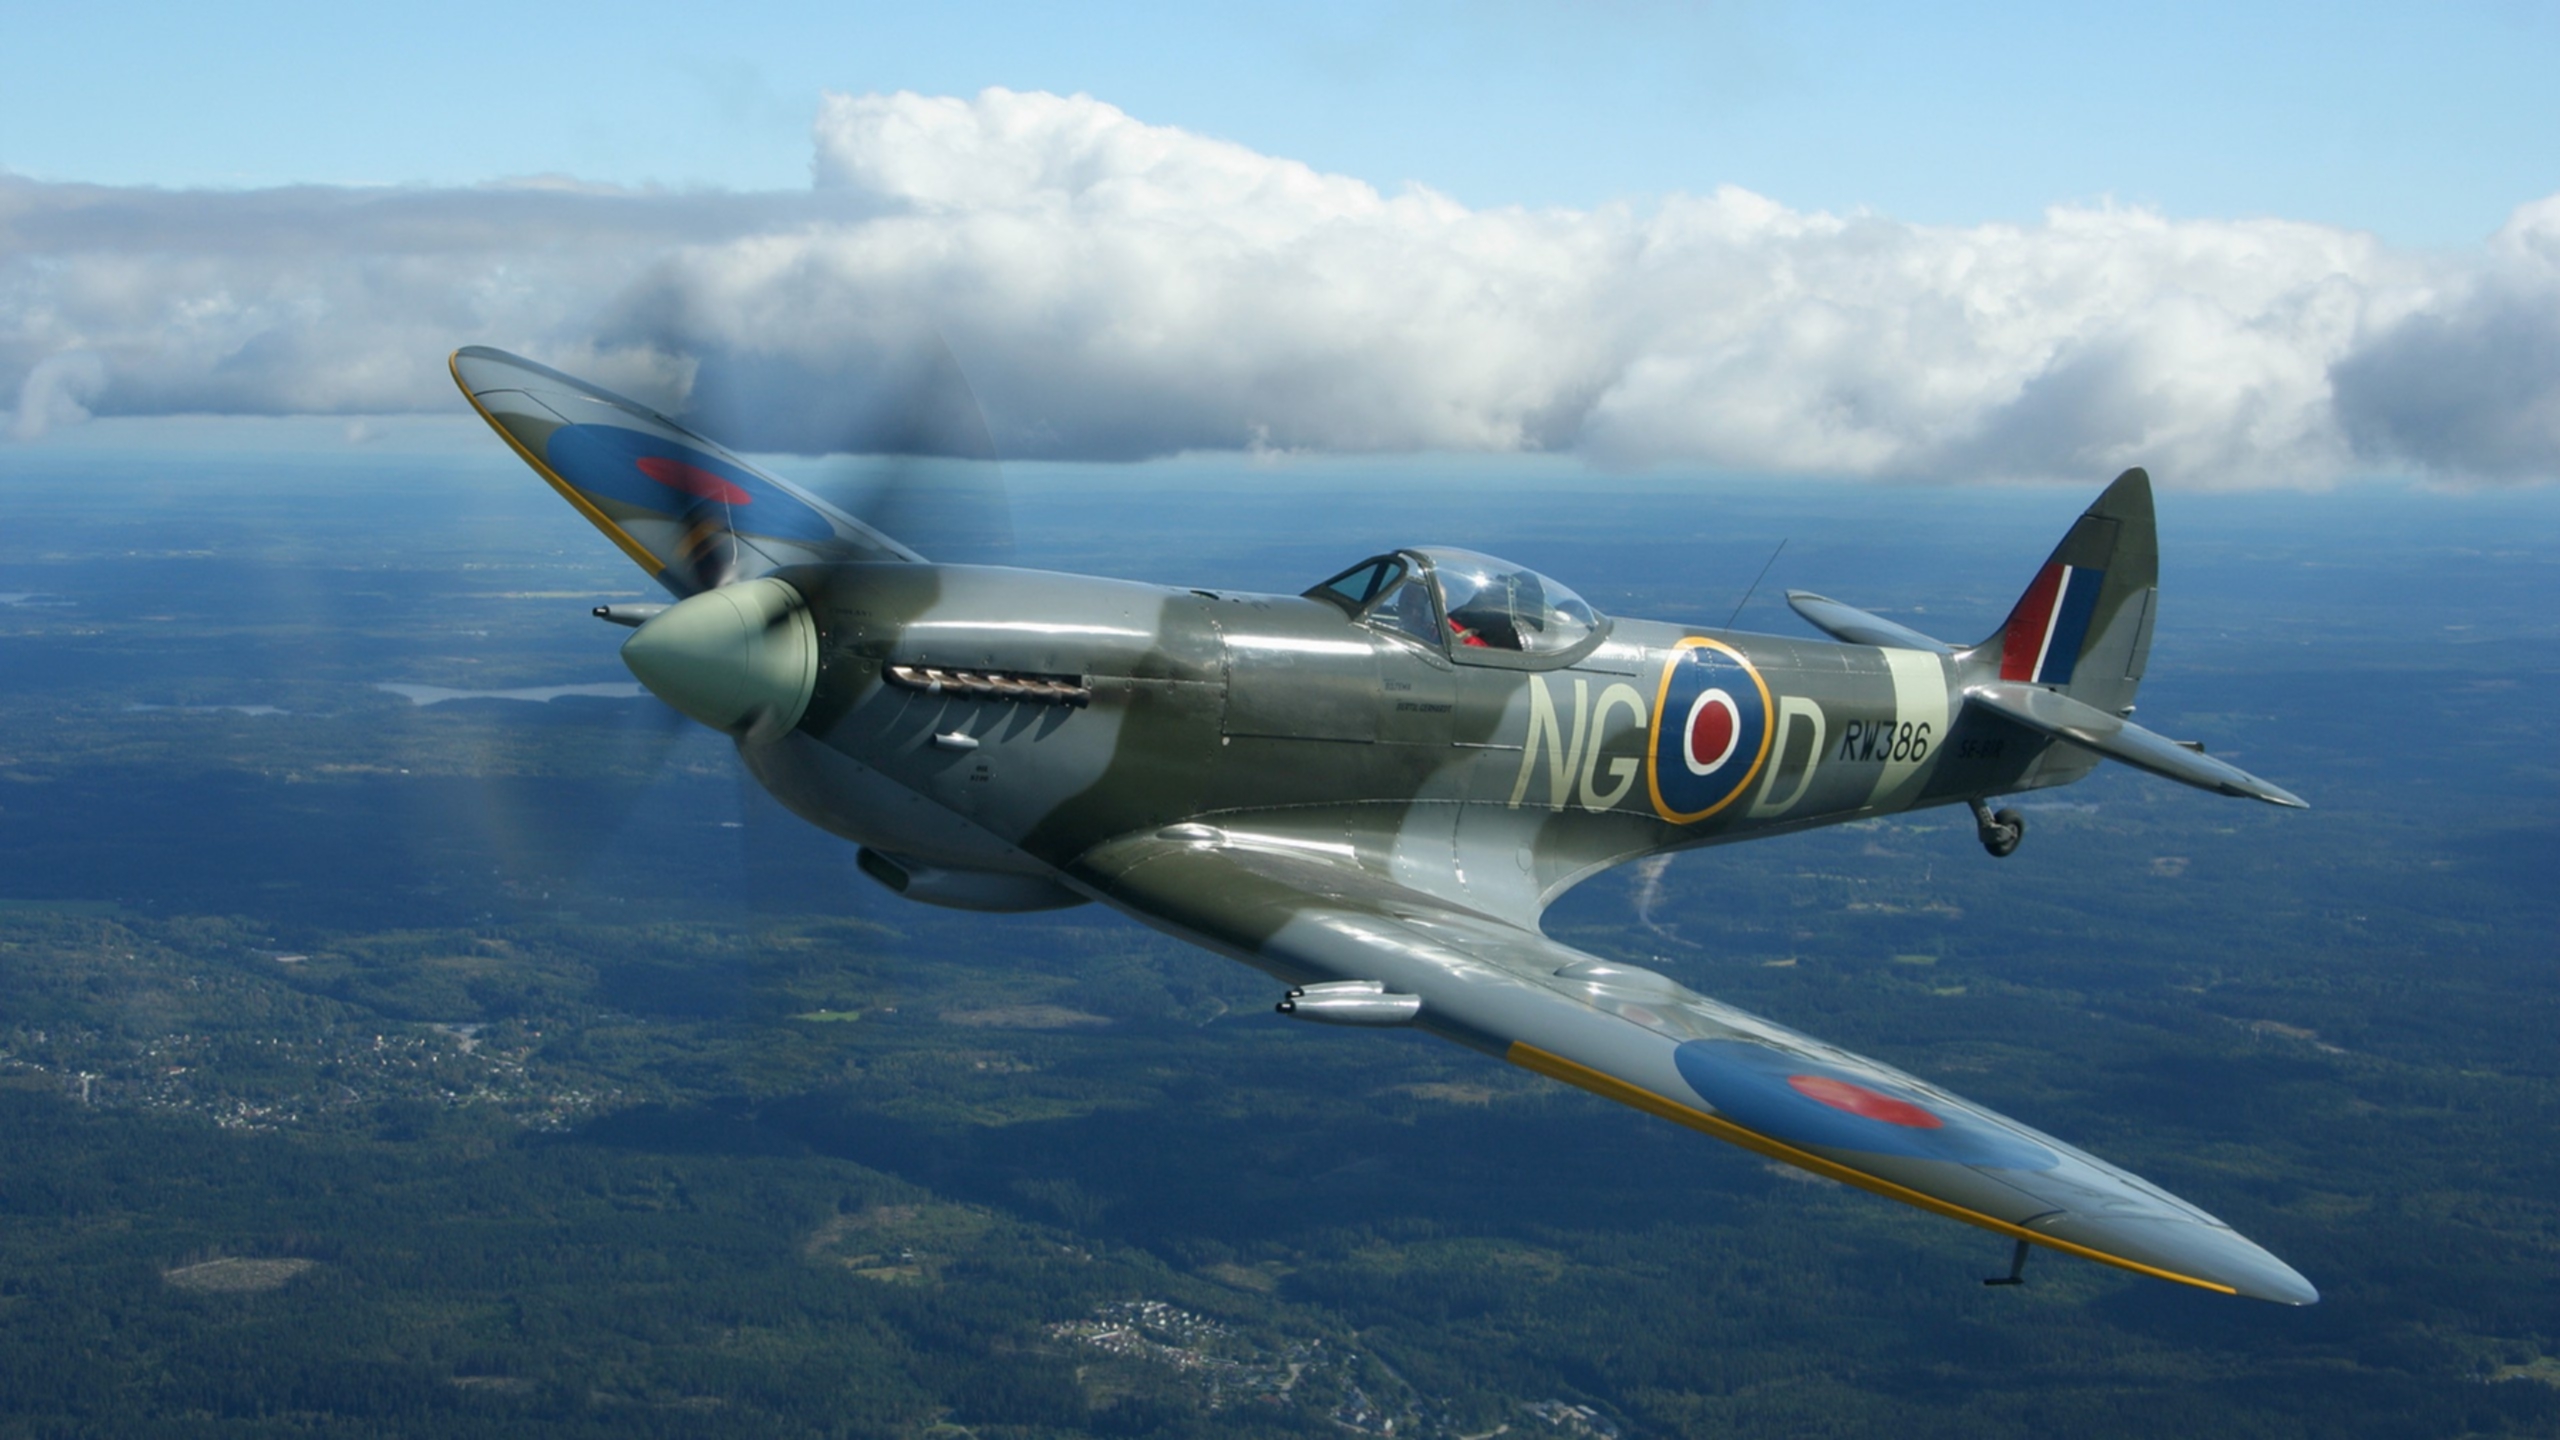 General 2560x1440 airplane World War II aircraft military aircraft Supermarine Spitfire Royal Air Force Warbird military British aircraft sky flying clouds landscape